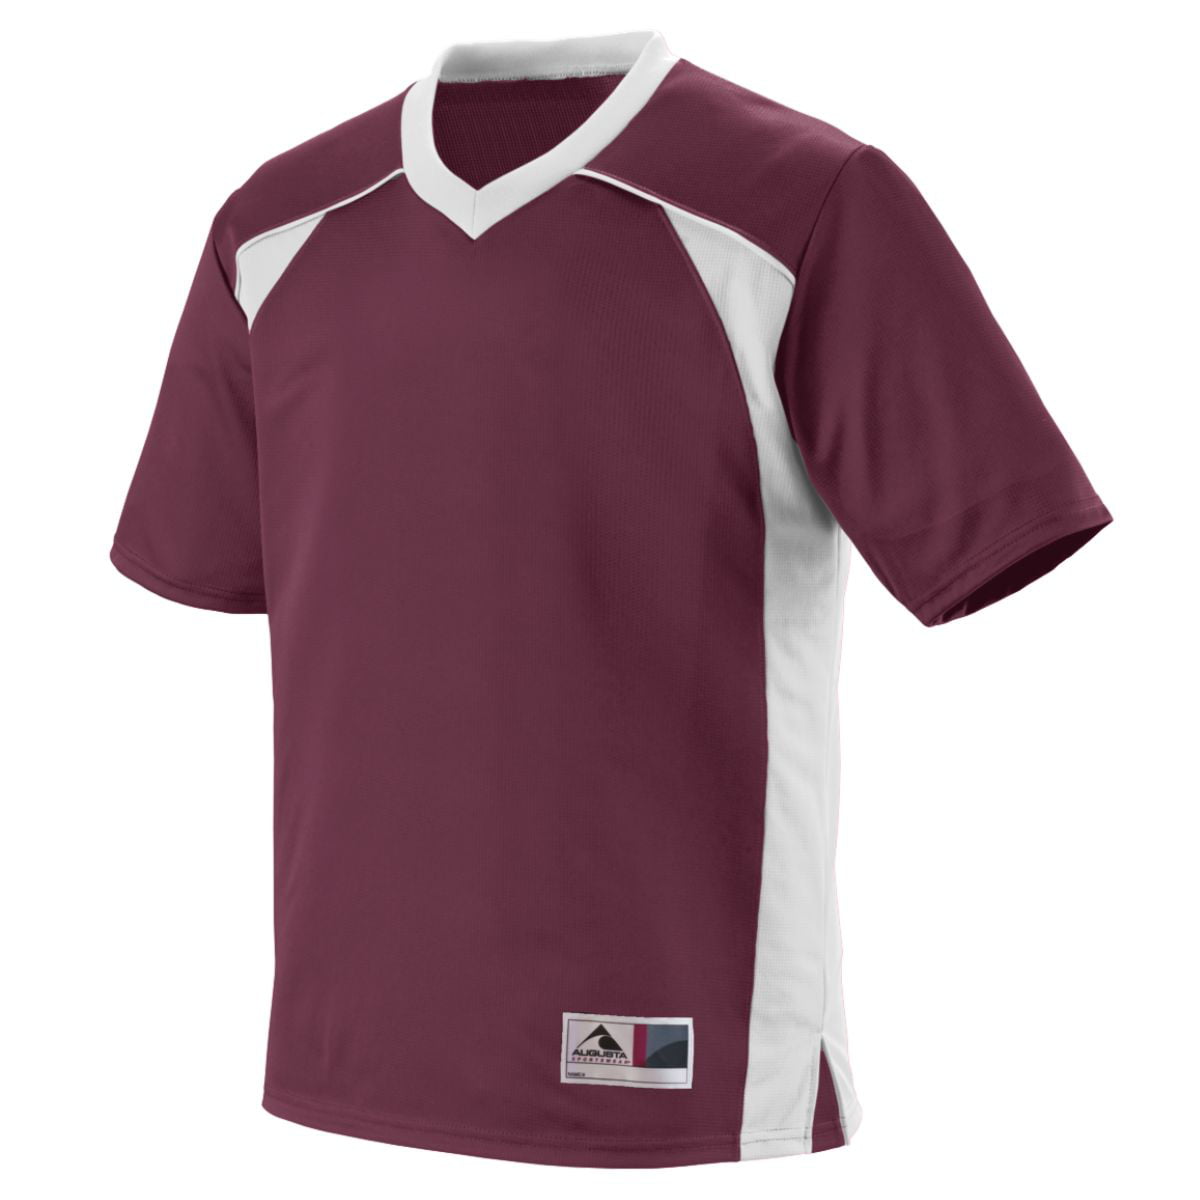 maroon and white jersey